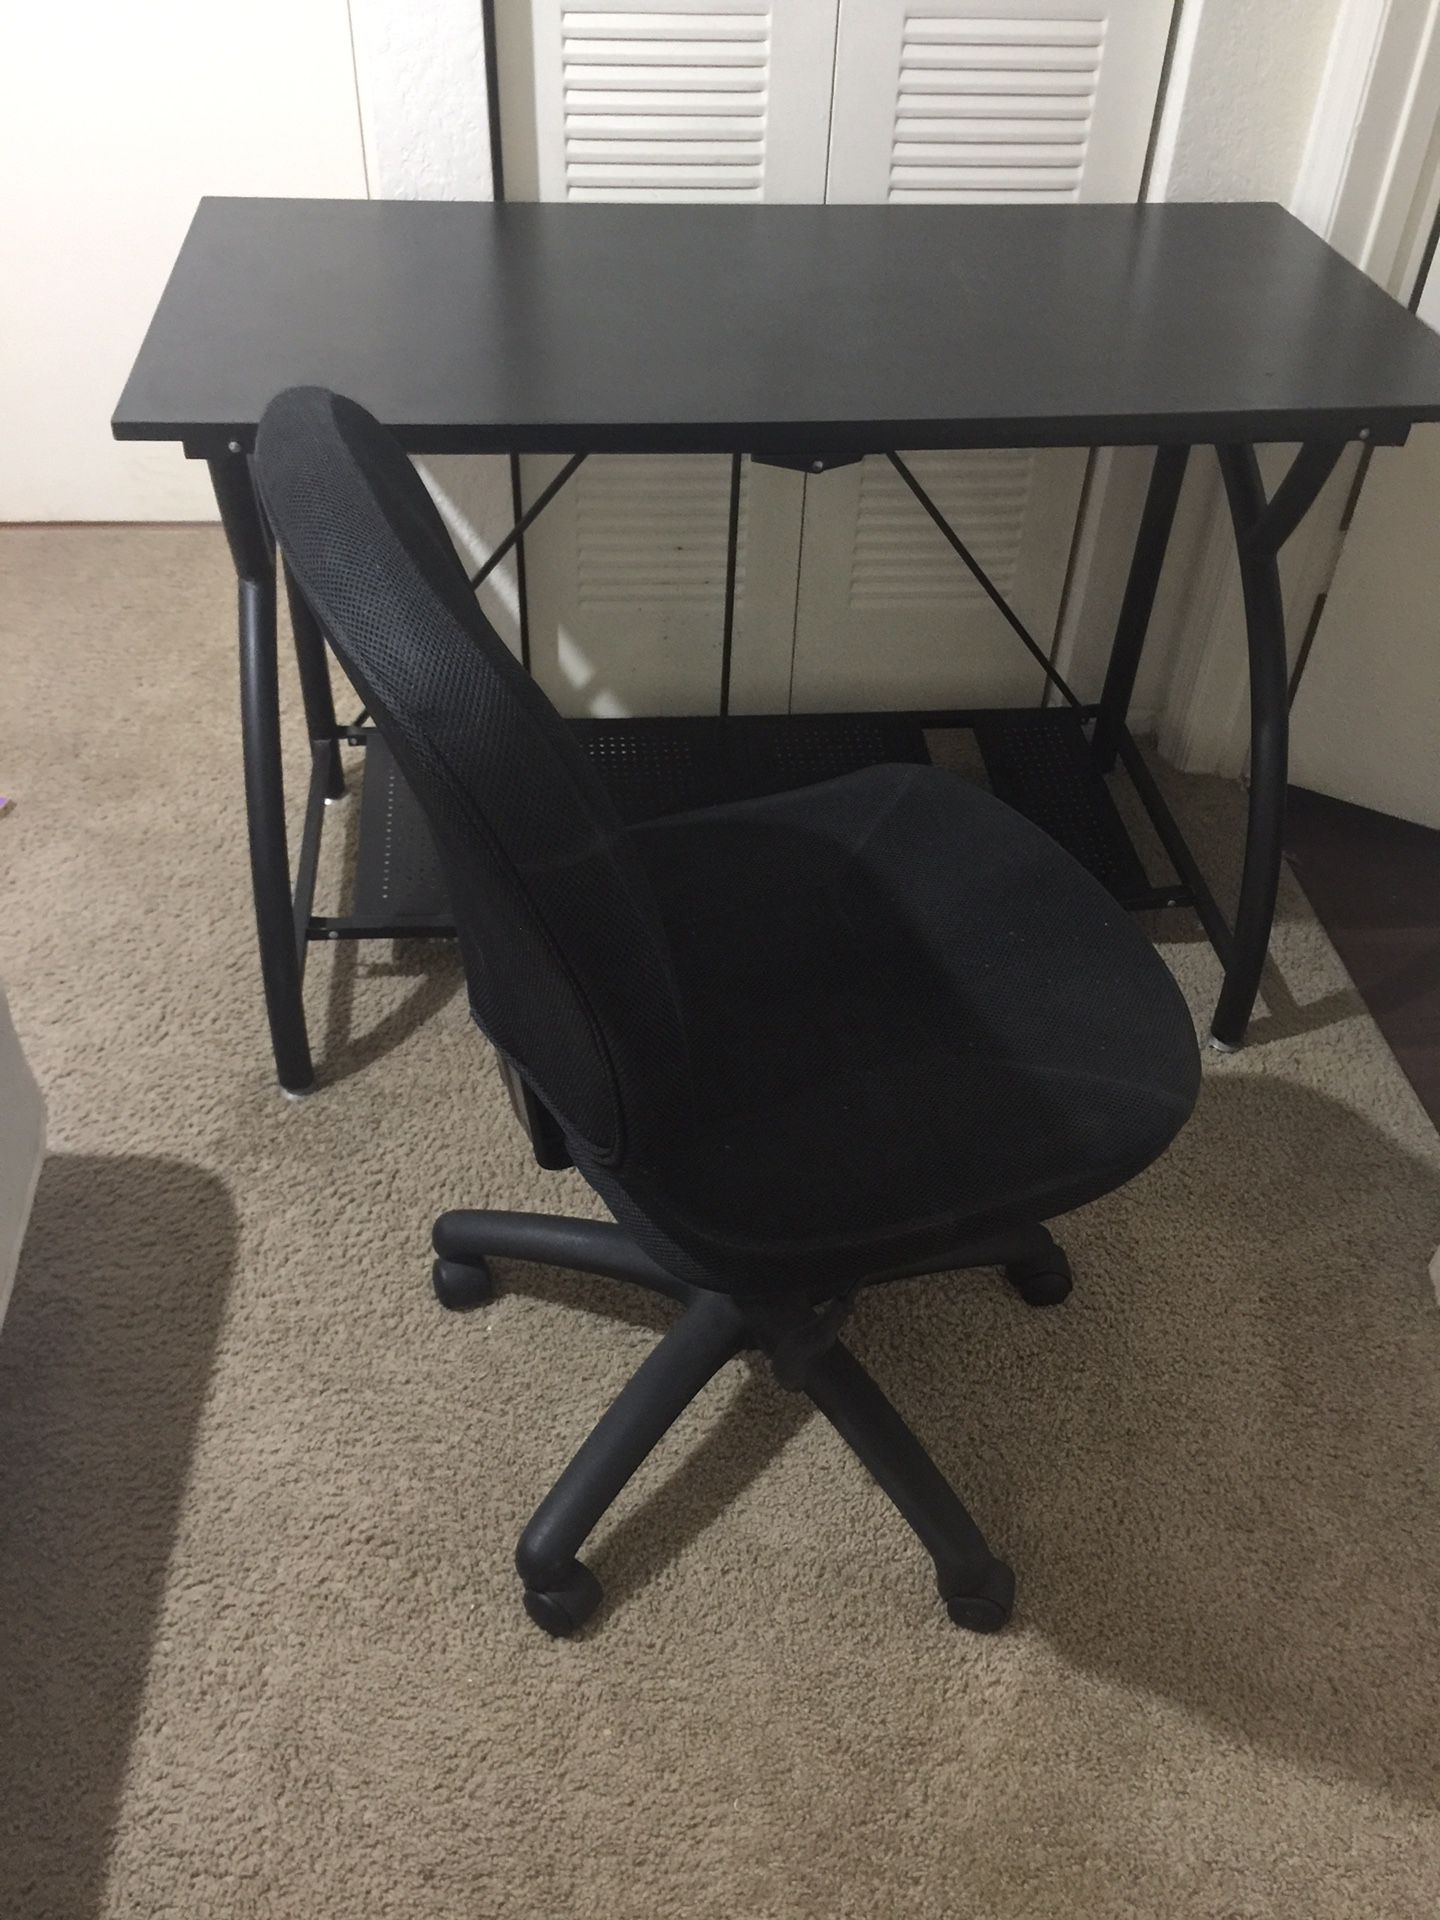 Office desk and chair VERY NICE!